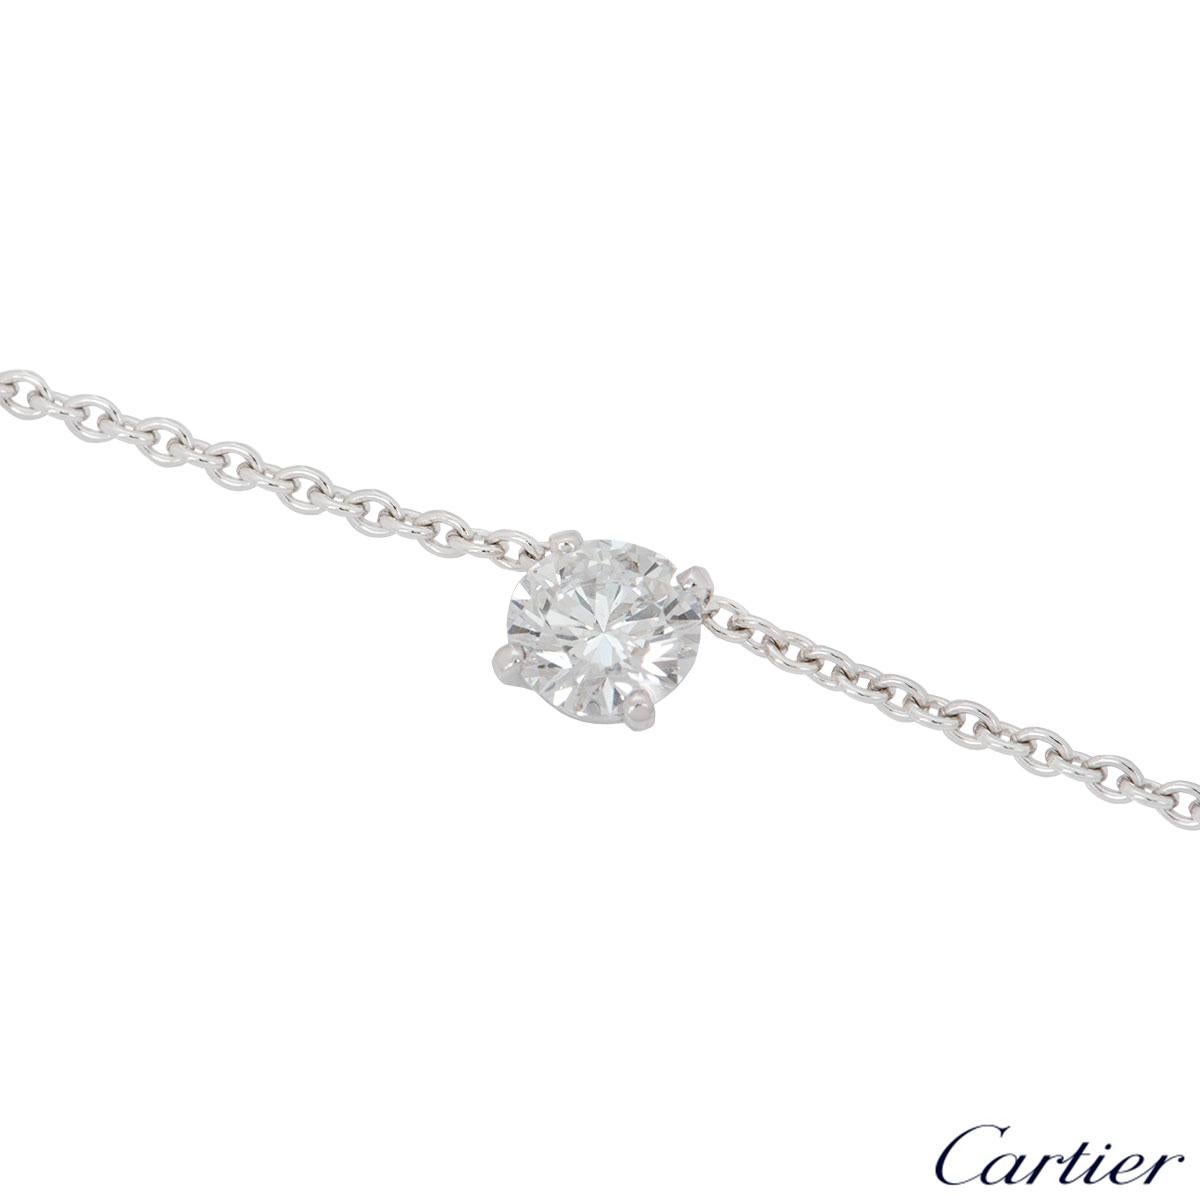 A beautiful 18k white gold diamond necklace by Cartier. The necklace is set to the centre with a 0.80ct round brilliant cut diamond, E colour and VS2 in clarity. The necklace has a length of 16 inches and features a fishhook clasp with a gross